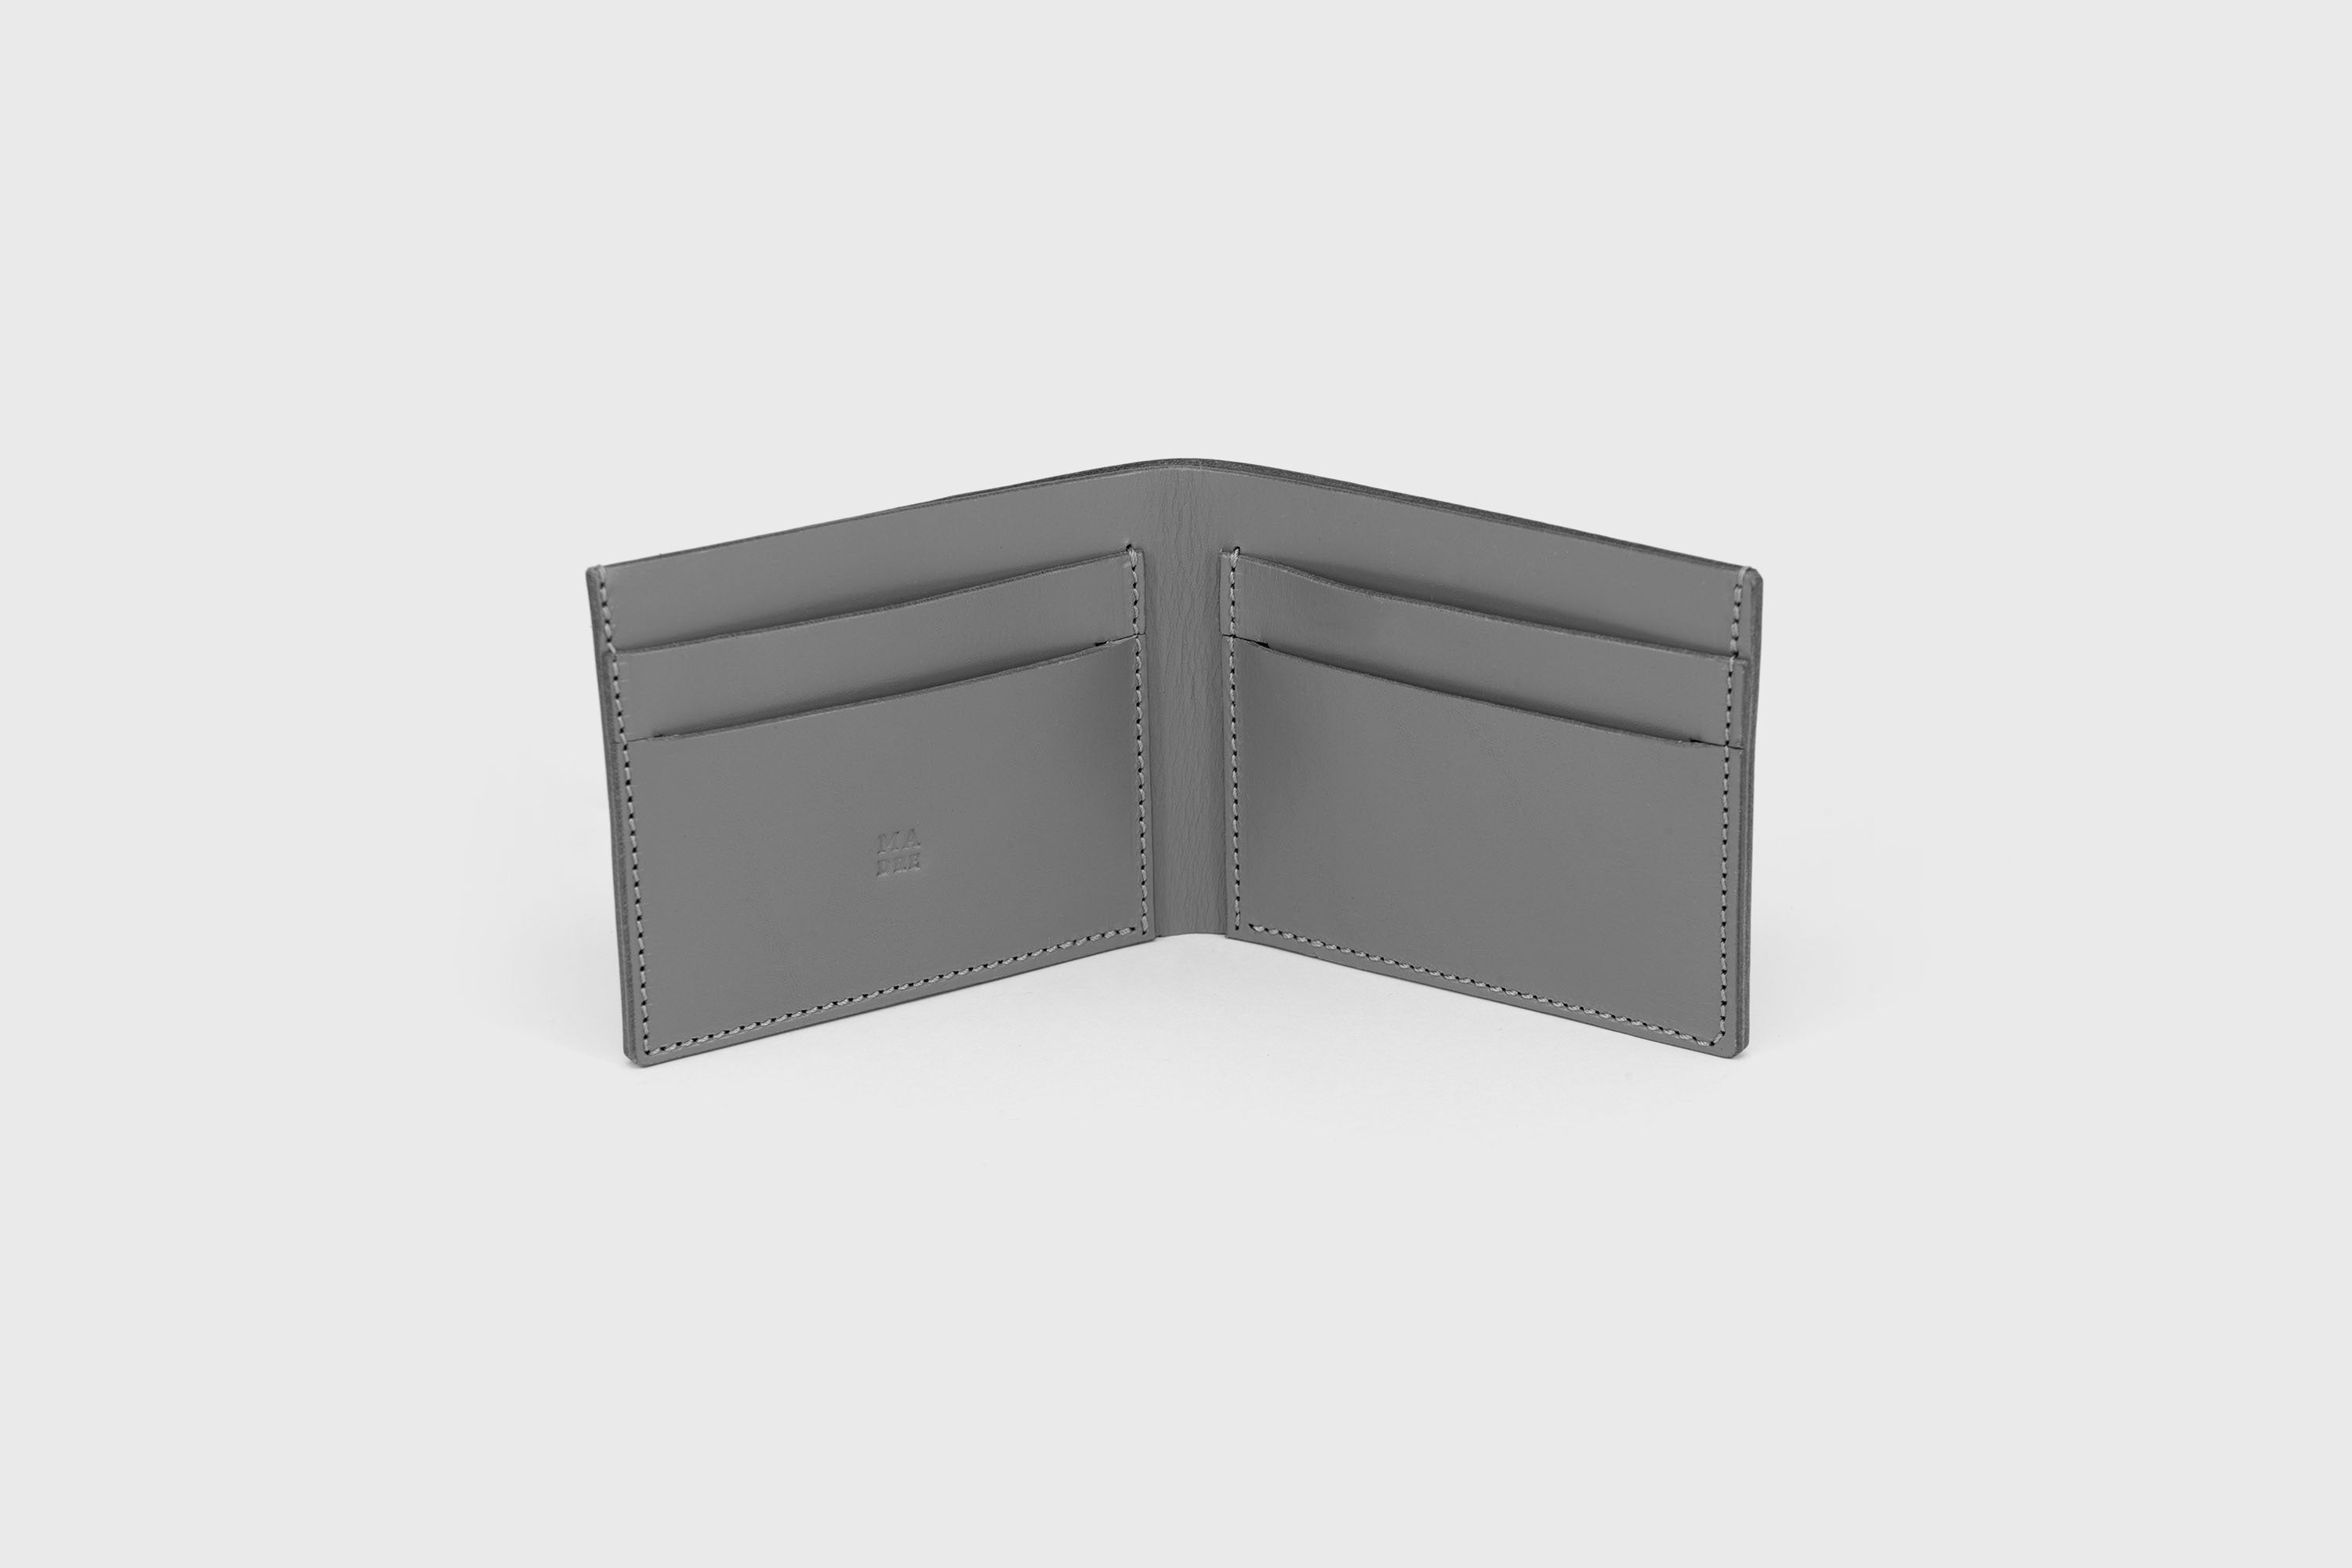 Bifold Wallet Light Grey Leather Vegetable Tanned Leather Premium Classic Design and Handcrafted By Atelier Madre Manuel Dreeesmann Barcelona Spain